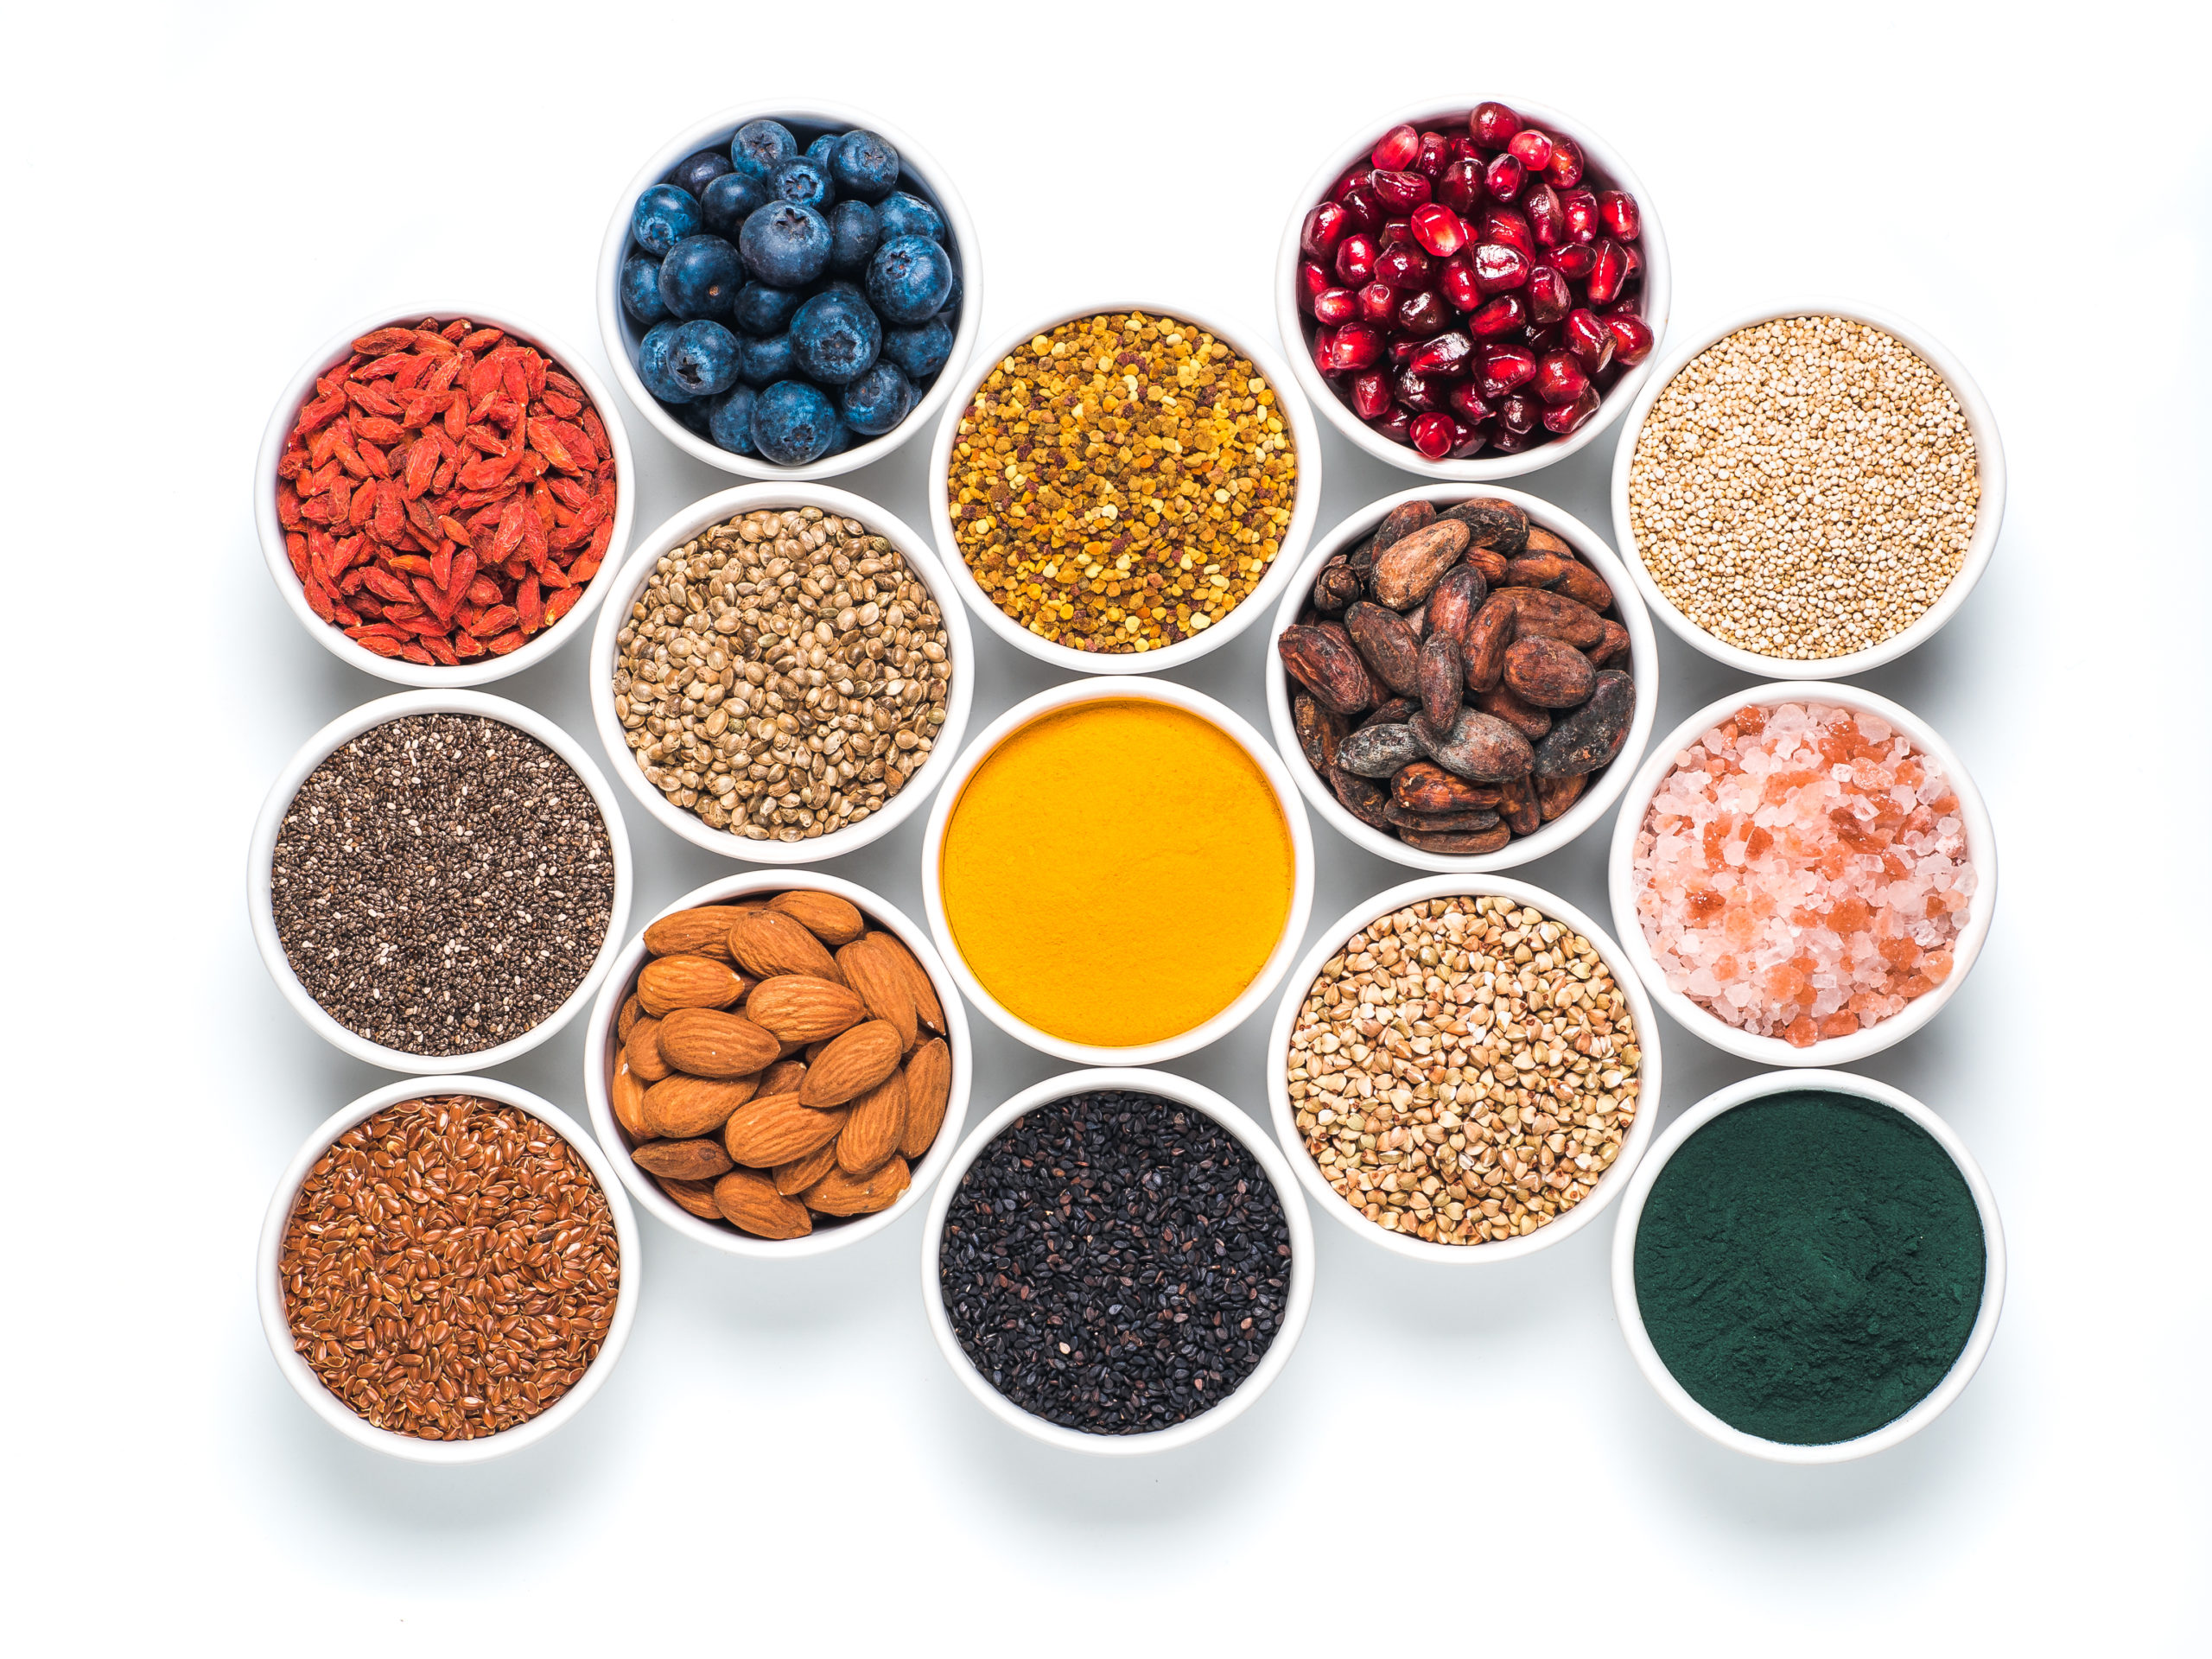 Various,Superfoods,In,Smal,Bowl,Isolated,On,White,Background.,Superfood